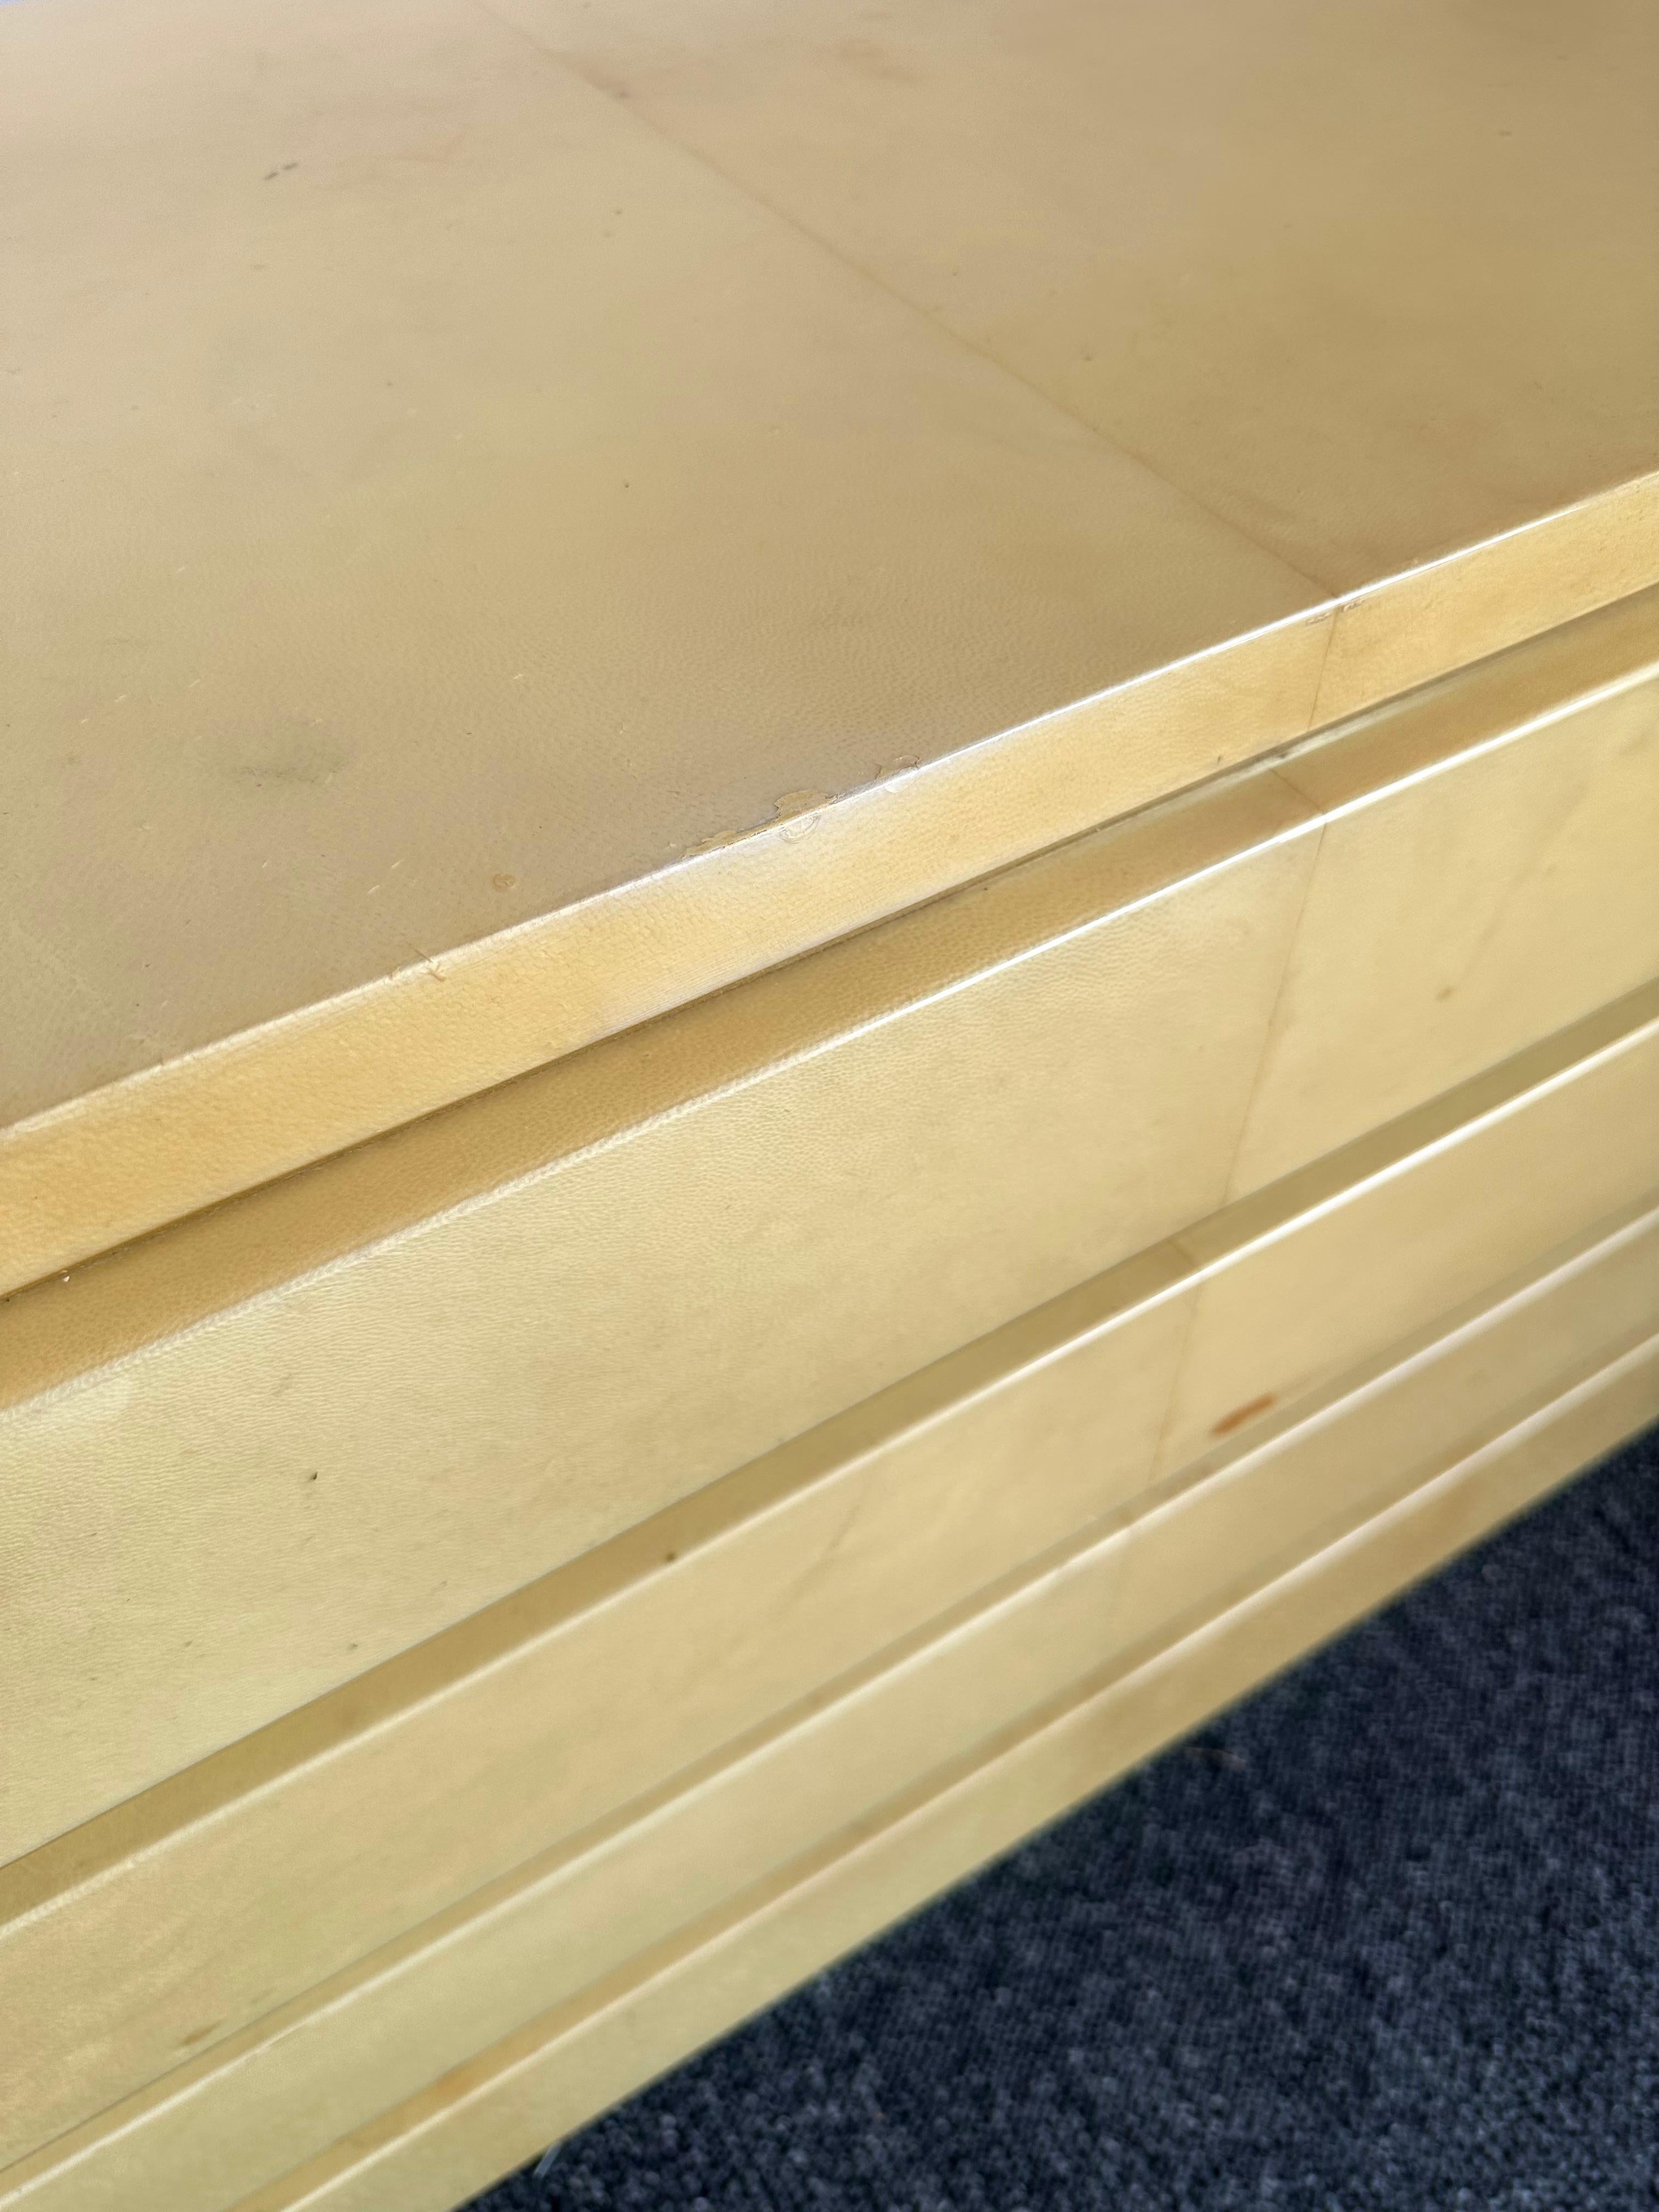 Italian Chest of Drawers Lacquered Goatskin and Brass by Aldo Tura, Italy, 1970s For Sale